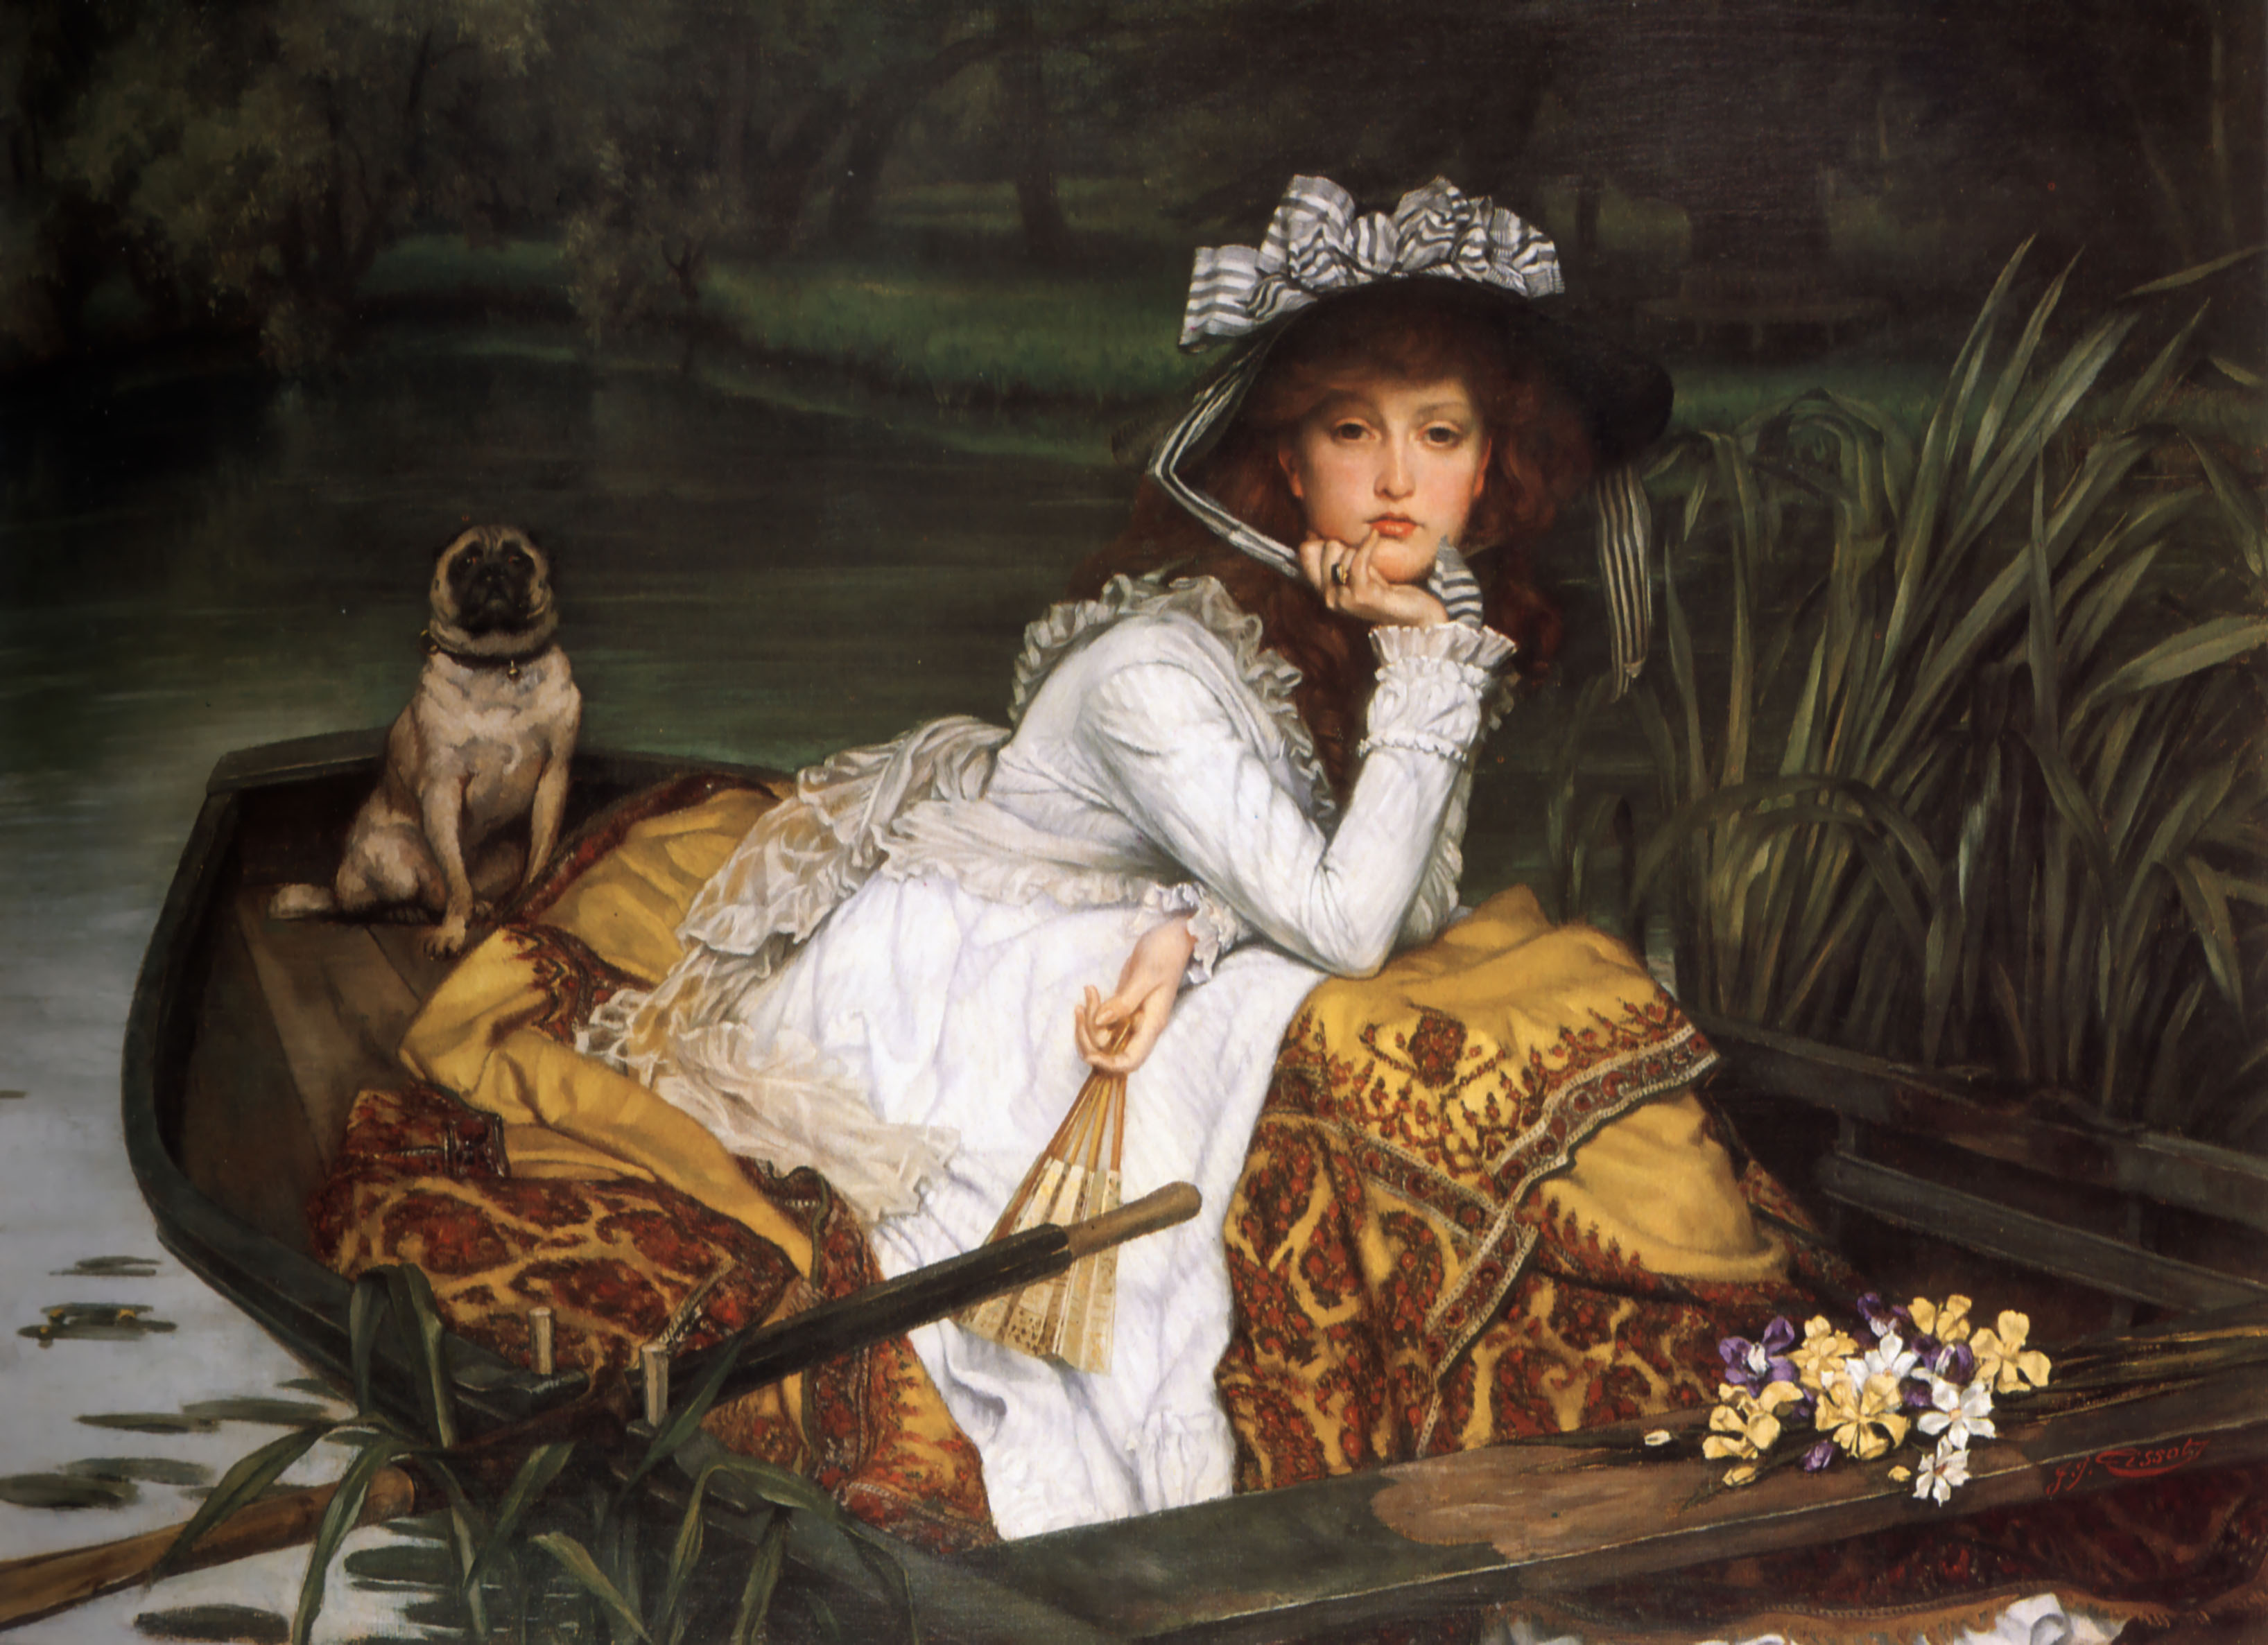 james_tissot_young_lady_in_a_boat.jpg